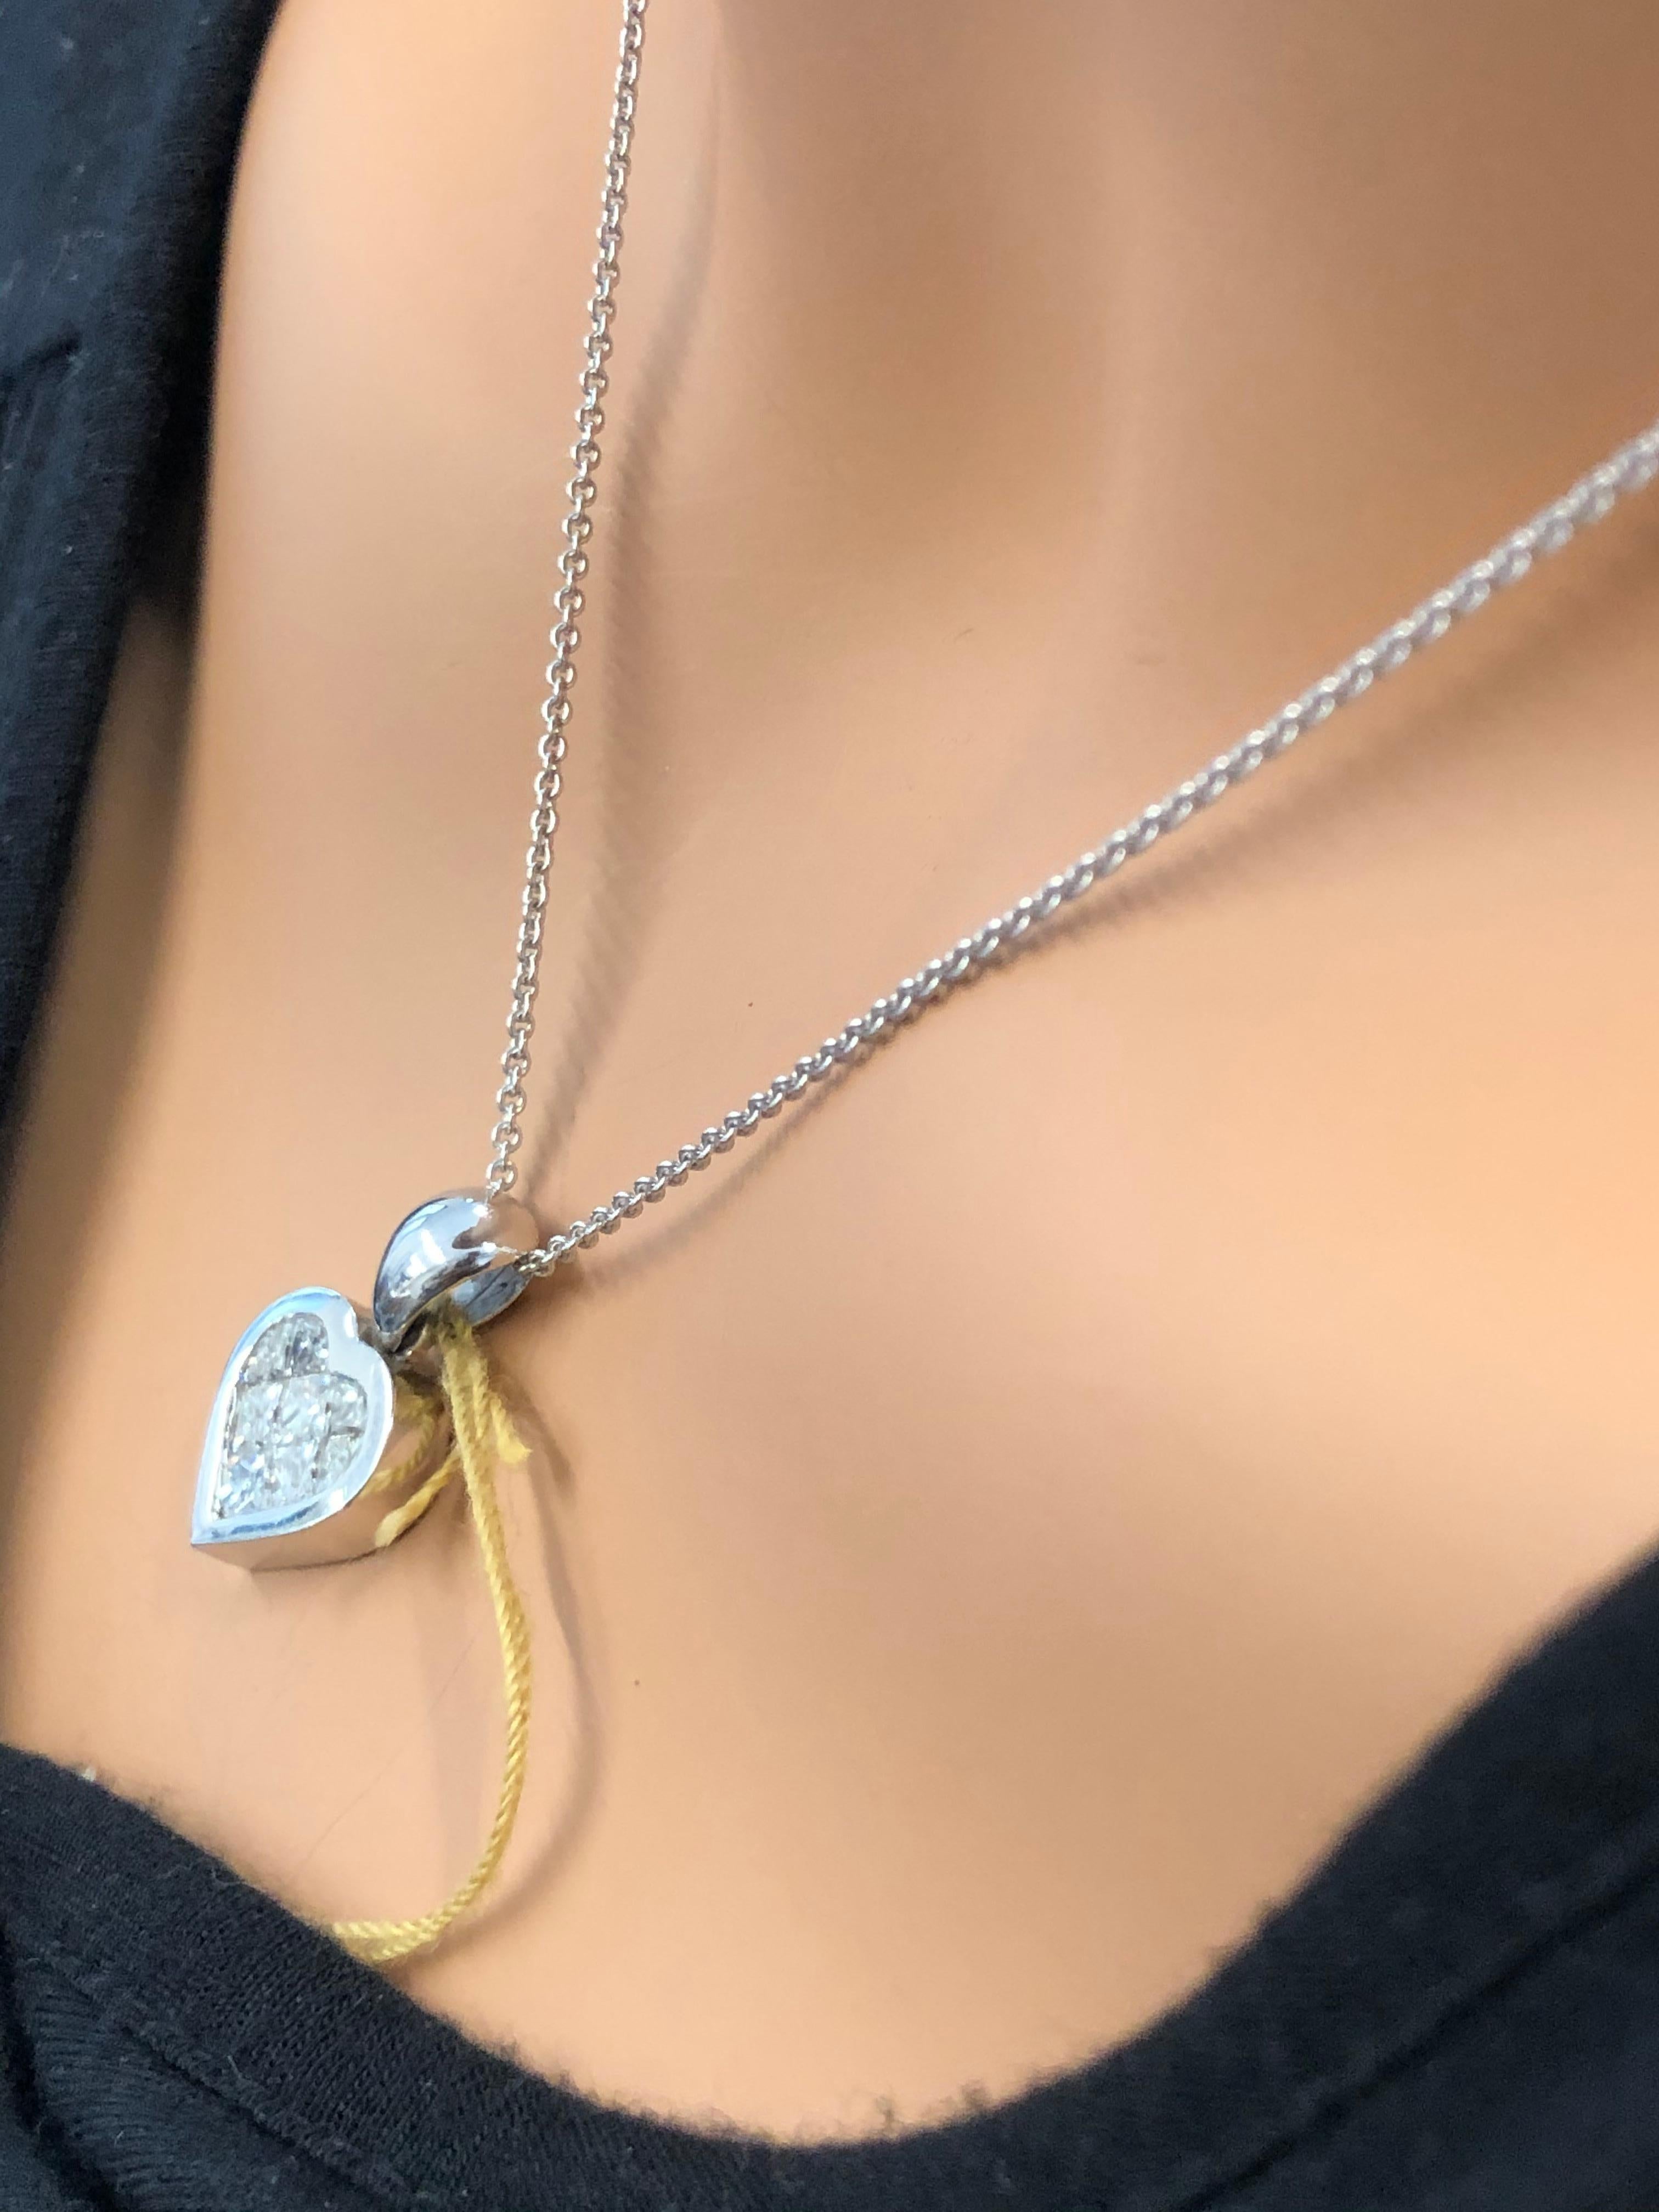 Designed in brightly polished 18 karat white gold, this beautiful diamond heart pendant features a total of 1.22 carats of invisibly channel set diamonds sparkling in the center. This gorgeous heart gracefully hangs from a tapered bail that awaits